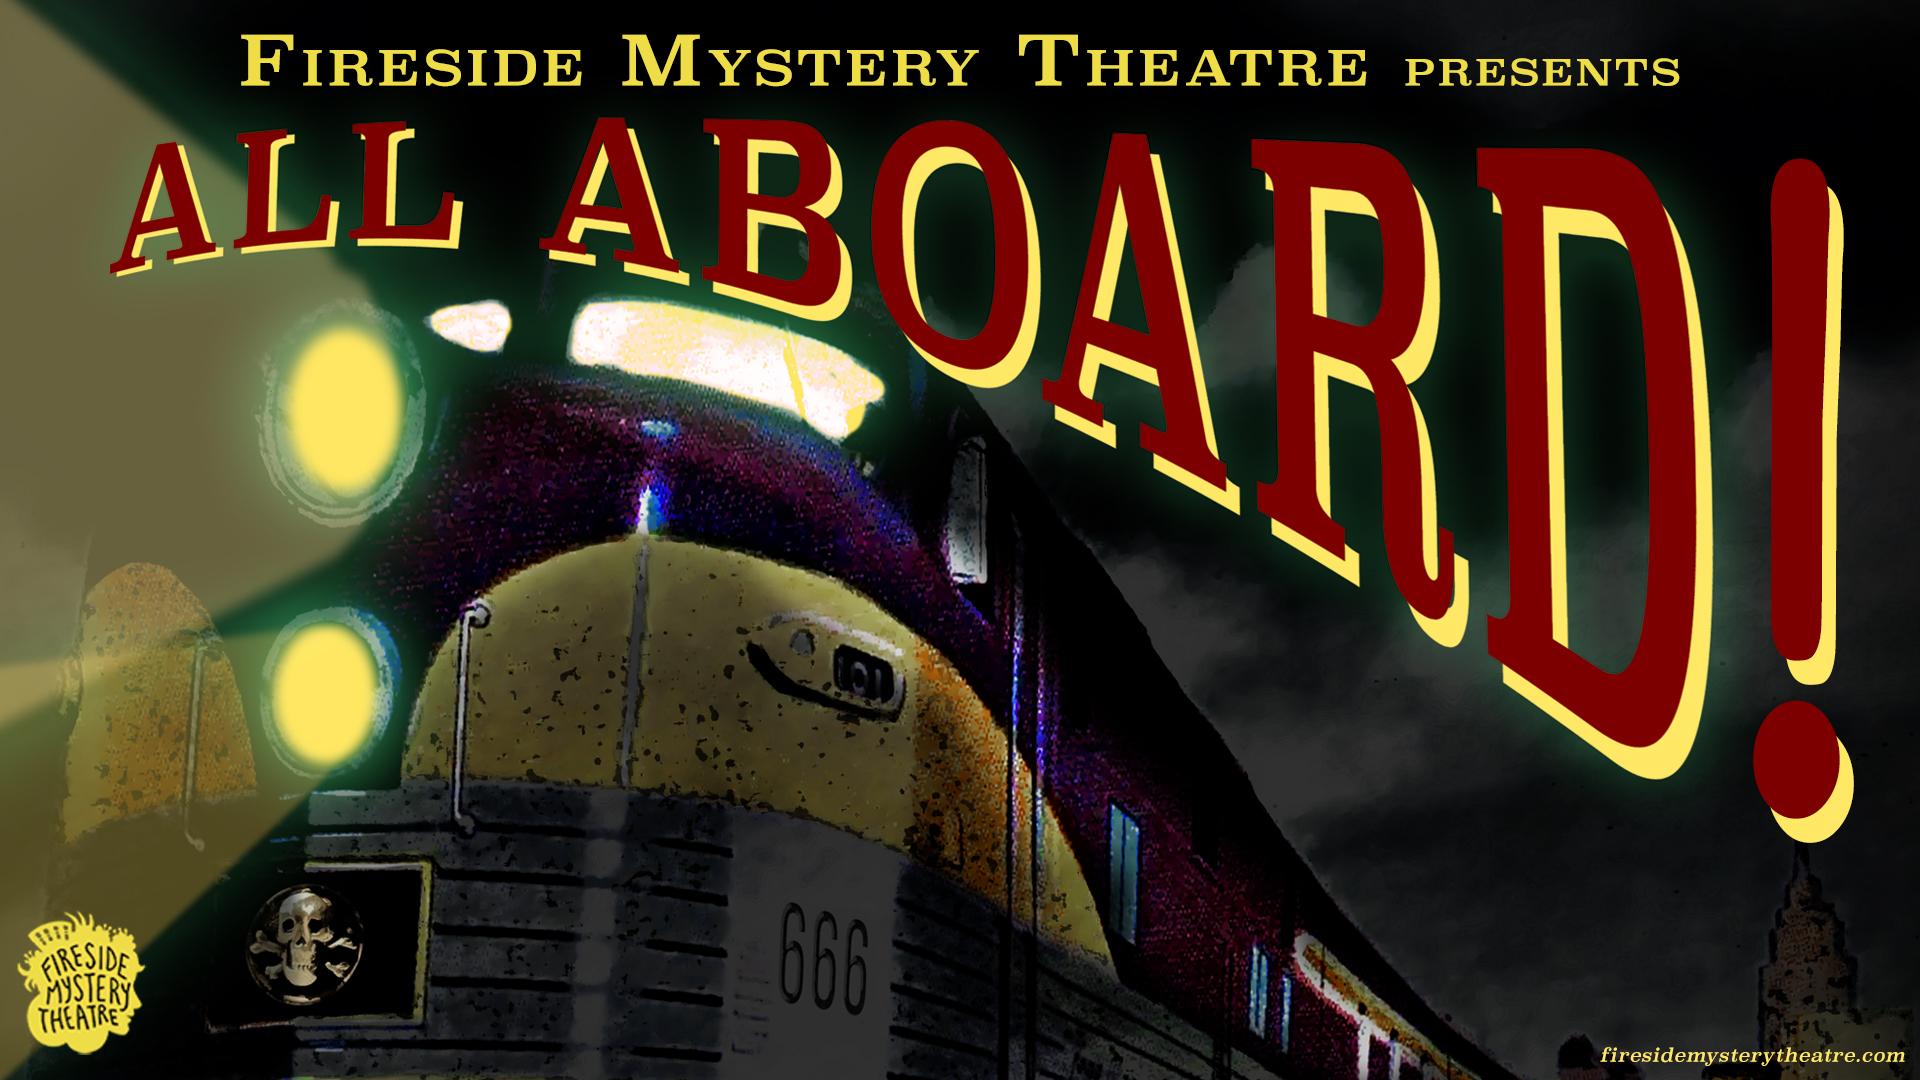  Fireside Mystery Theatre: All Aboard! "The Bar Car"